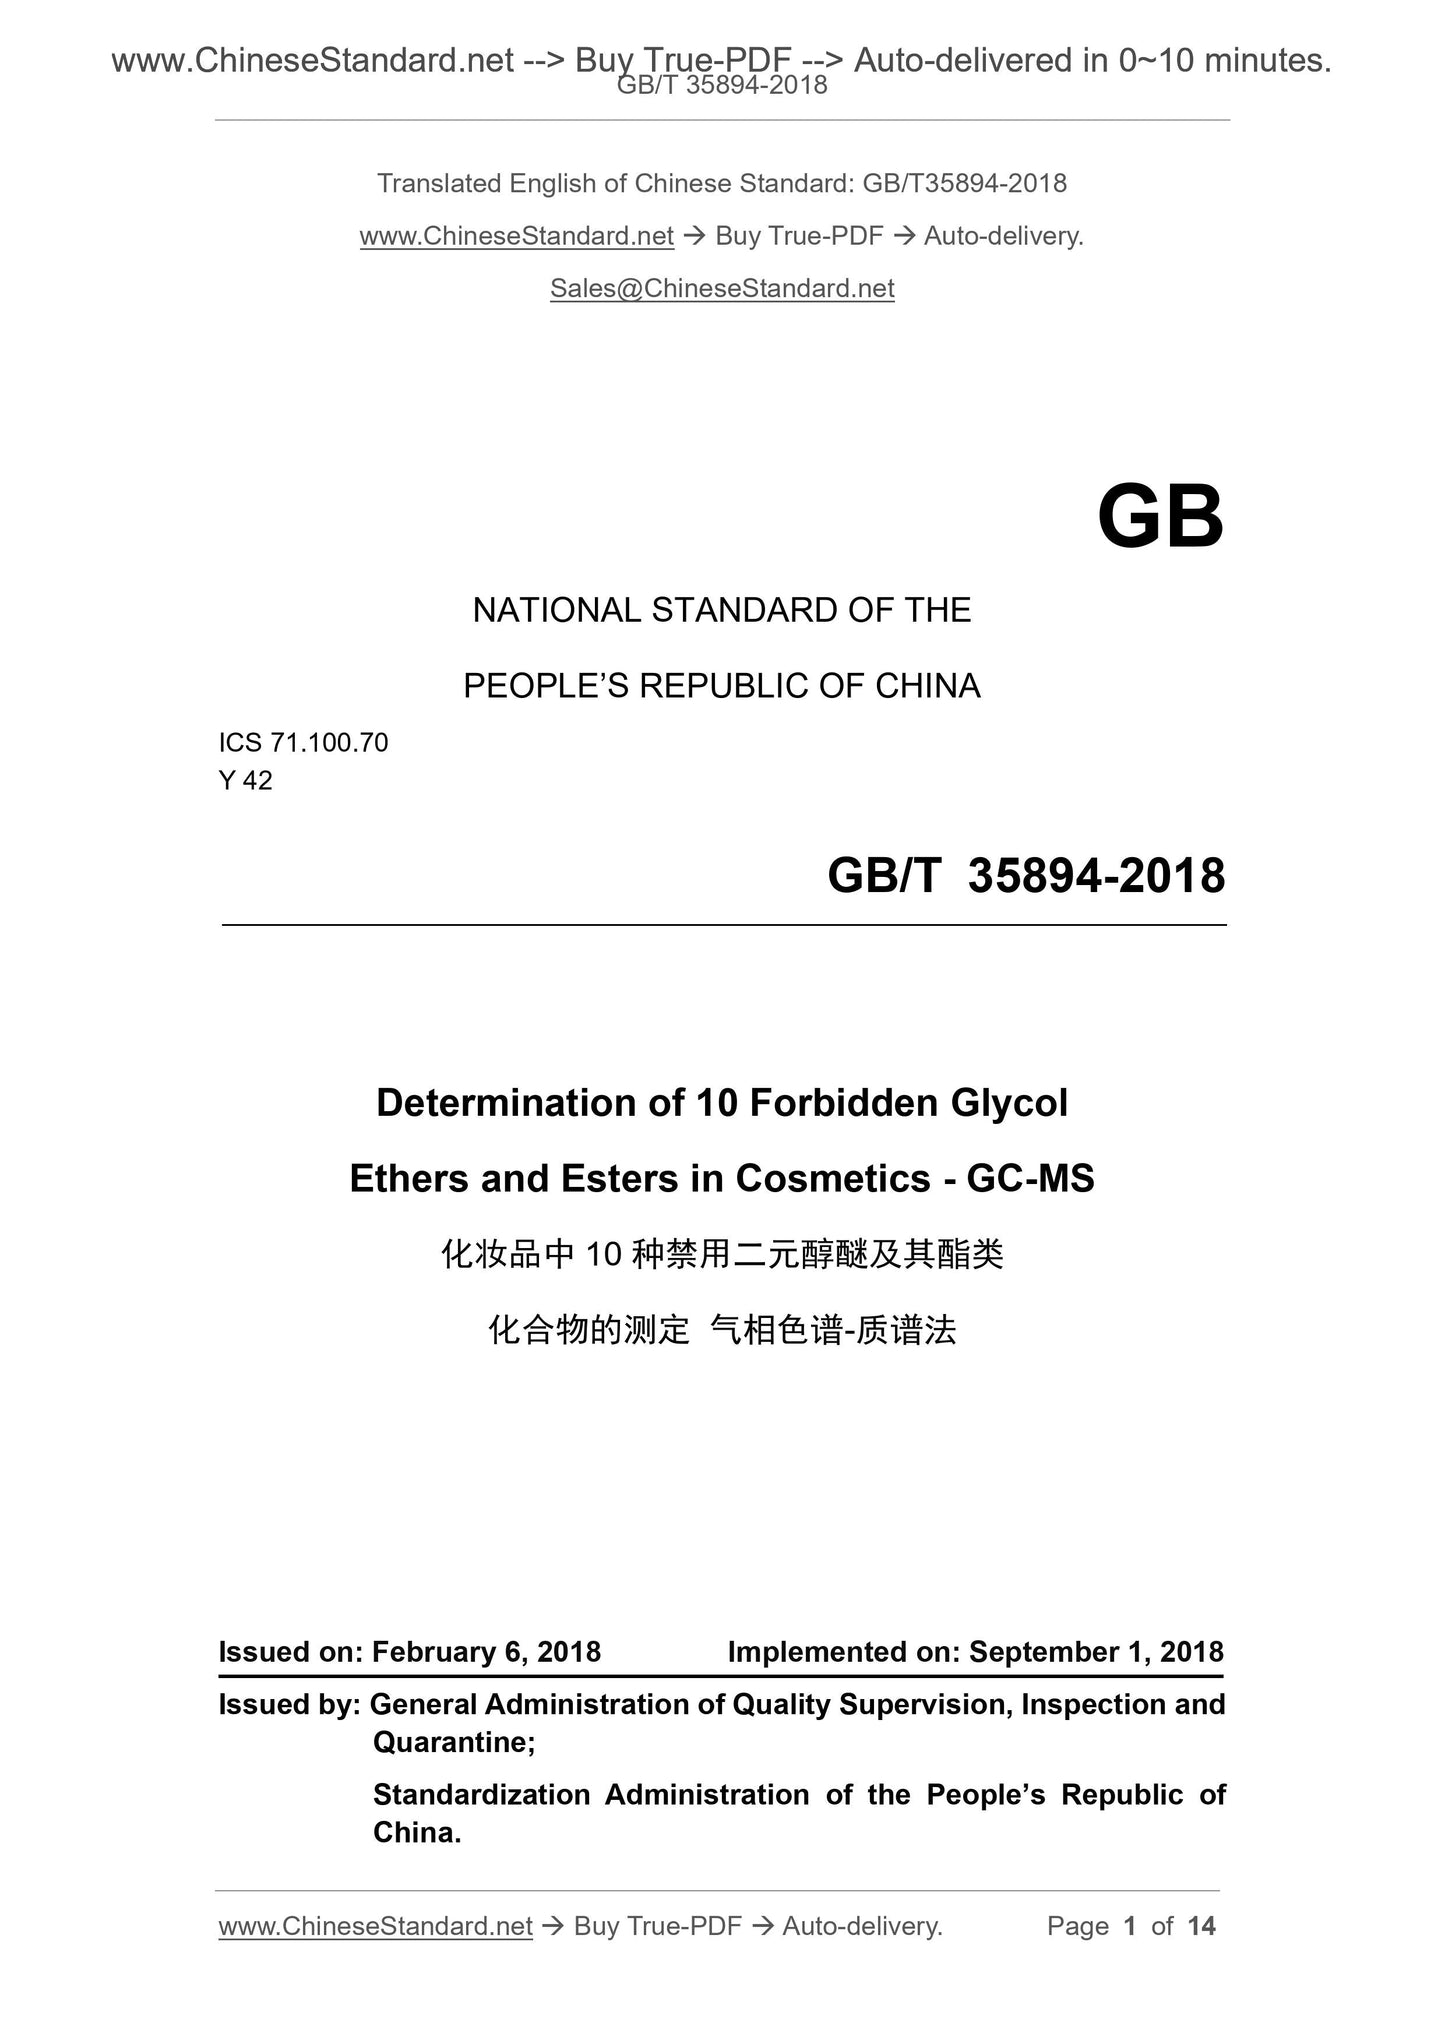 GB/T 35894-2018 Page 1